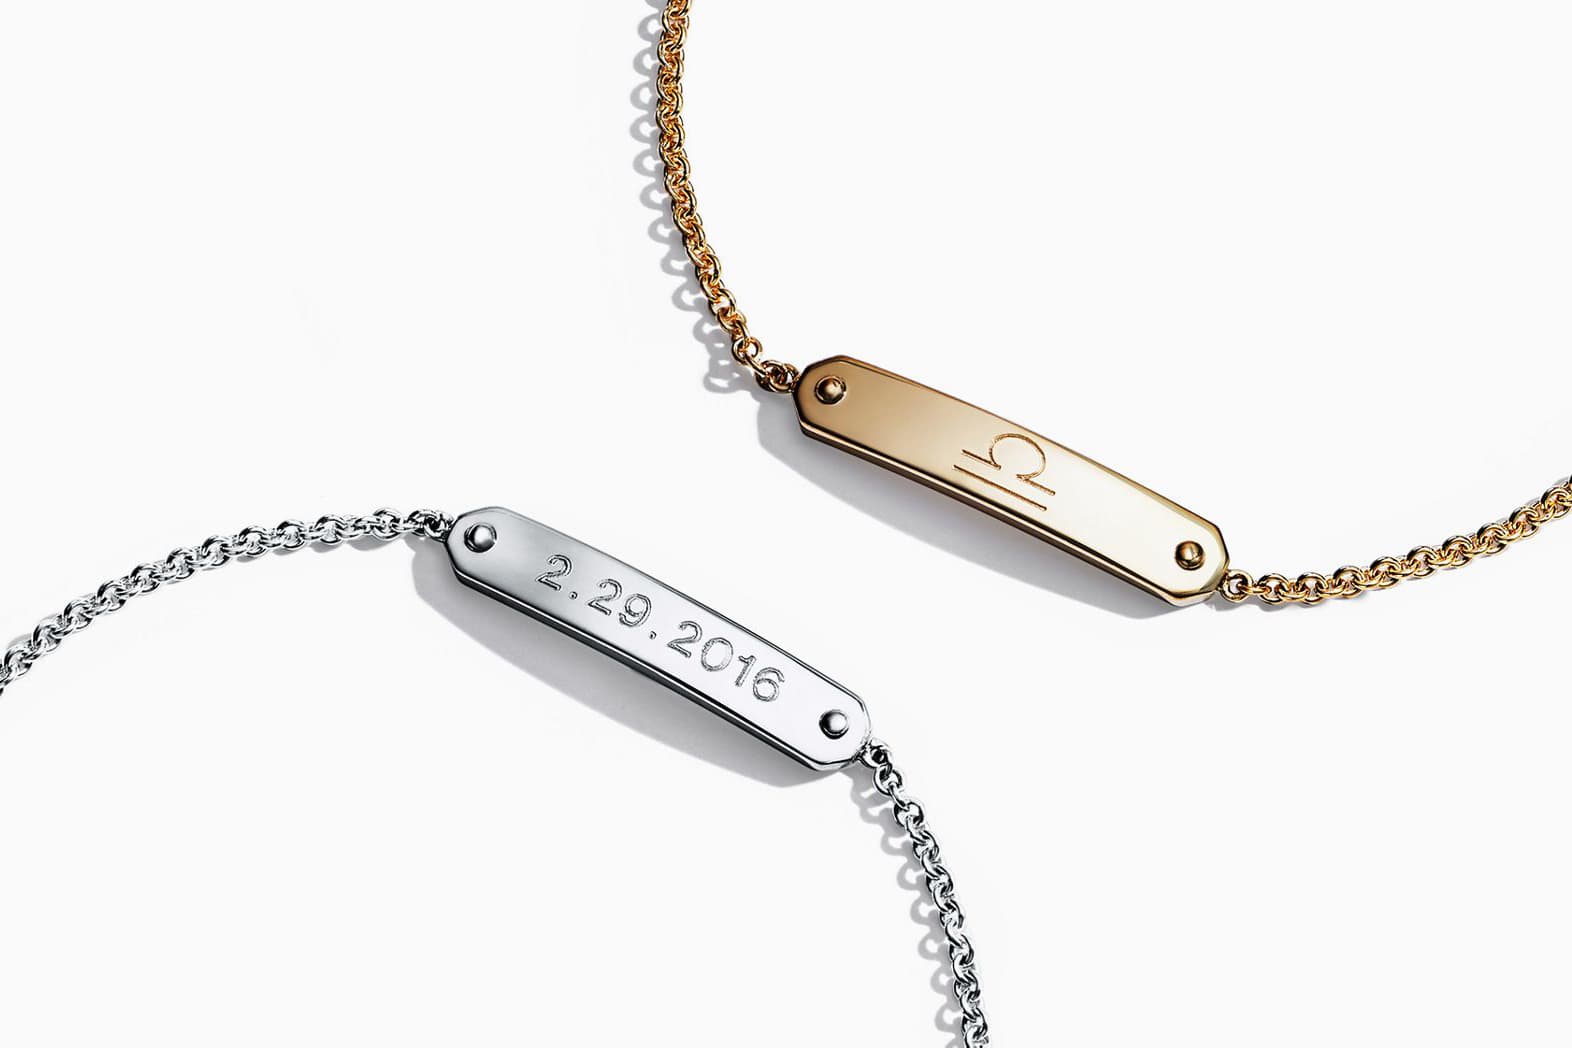 Tiffany & Co Bracelet with Personalized Hand Engraved Monograms | A Glad  Diary